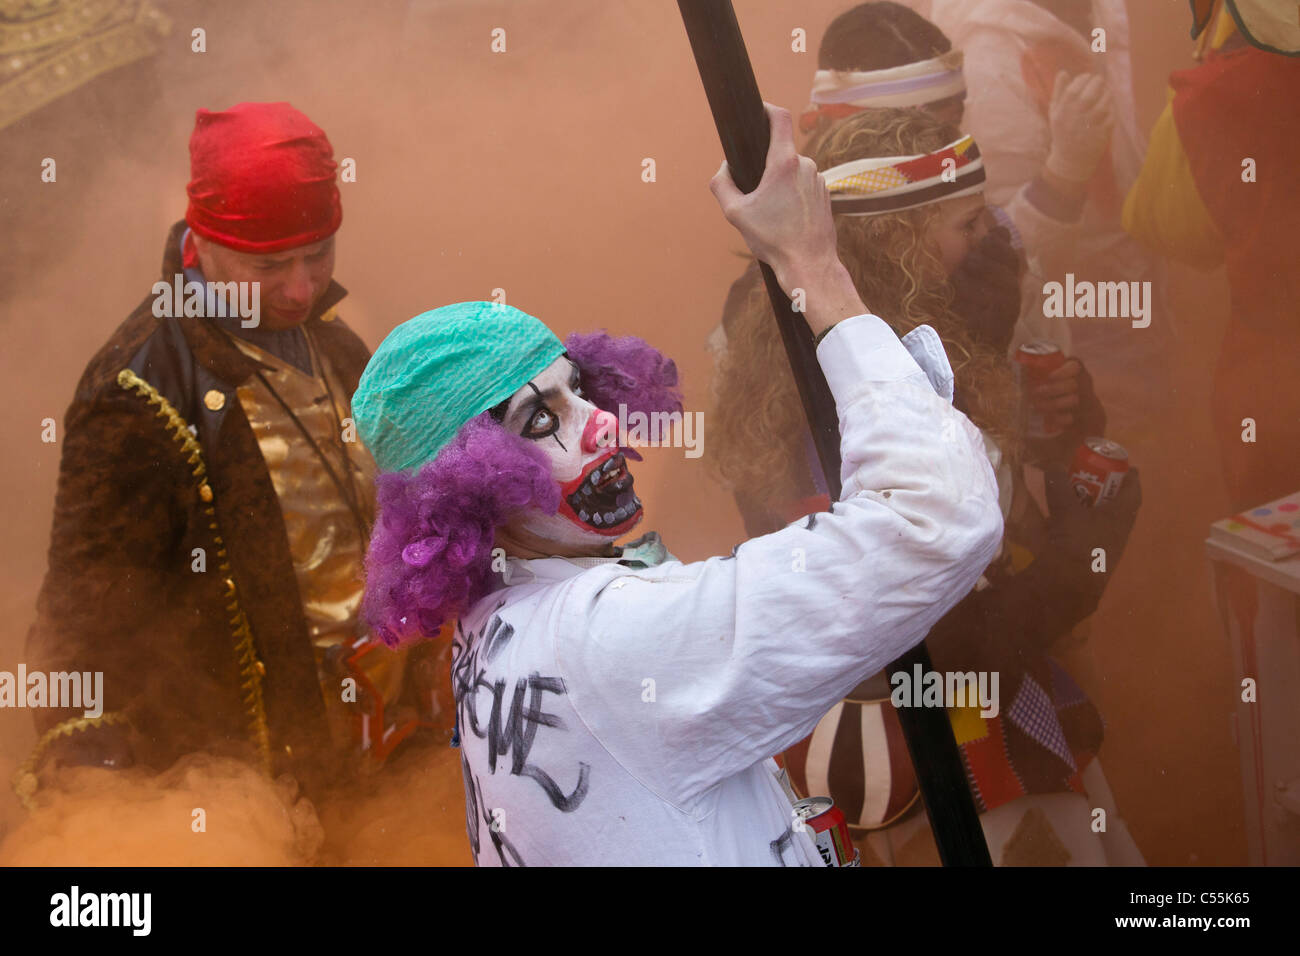 The Netherlands, Maastricht, People enjoying during yearly Carnival festival. Stock Photo